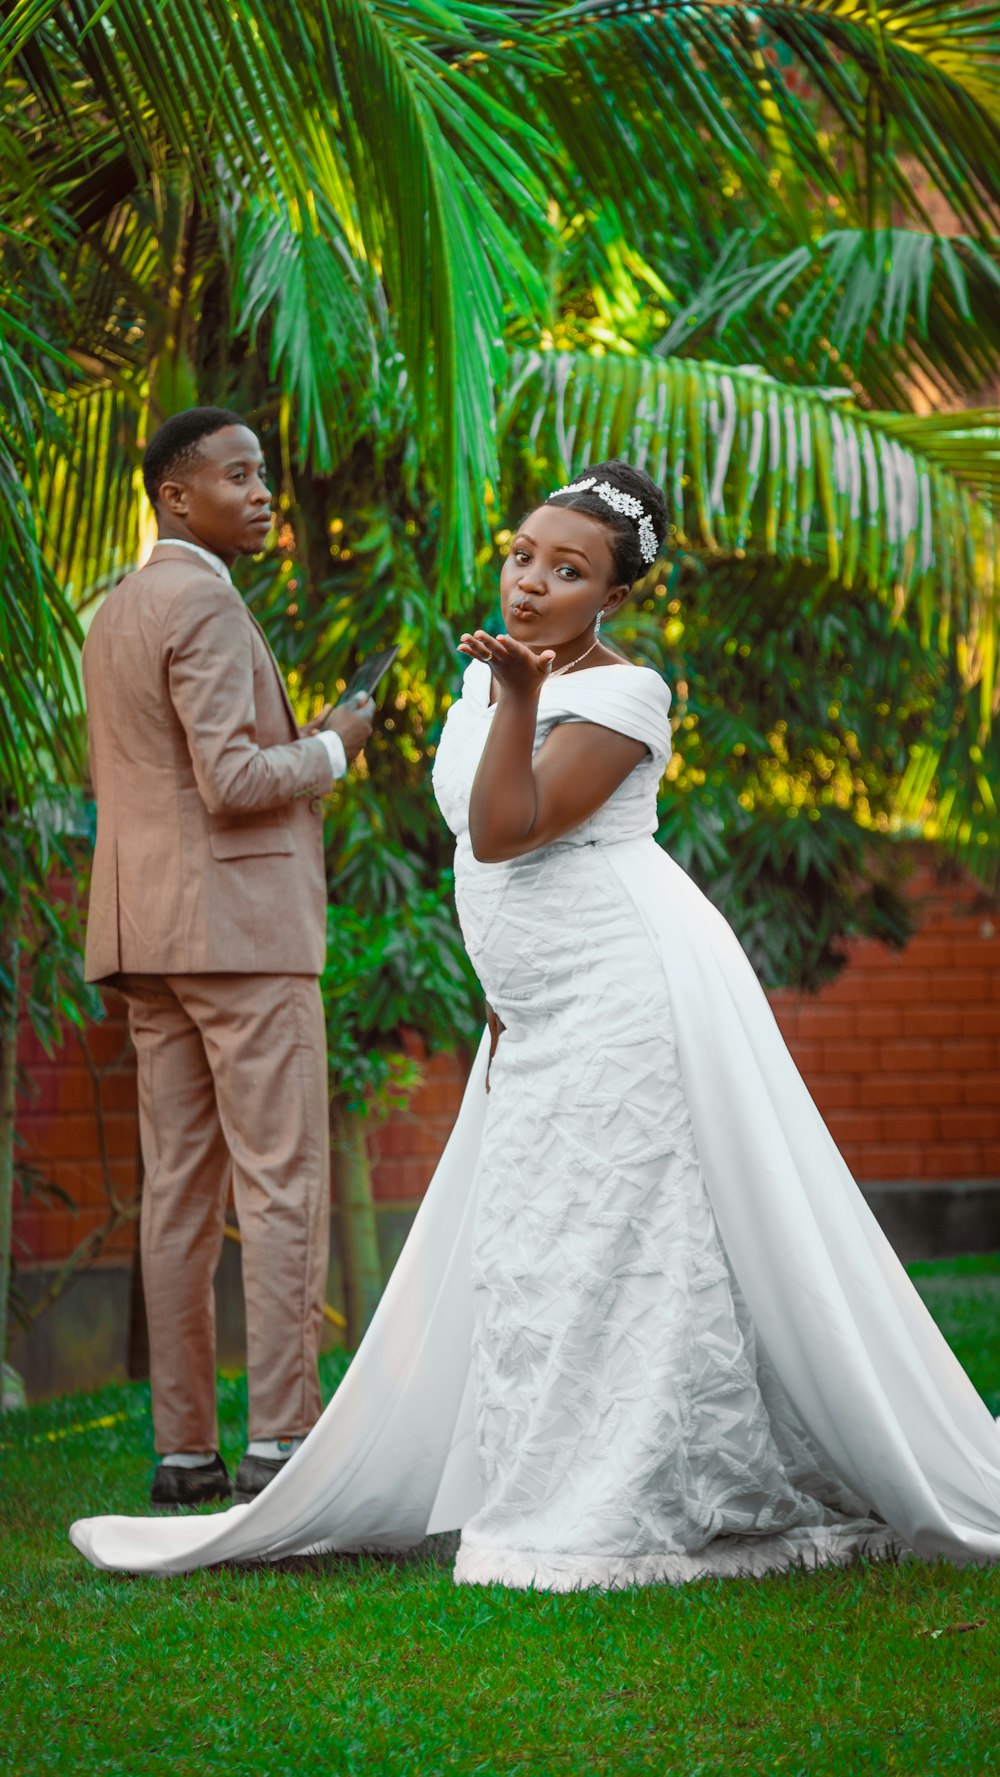 a woman in a wedding dress standing next to a man in a suit